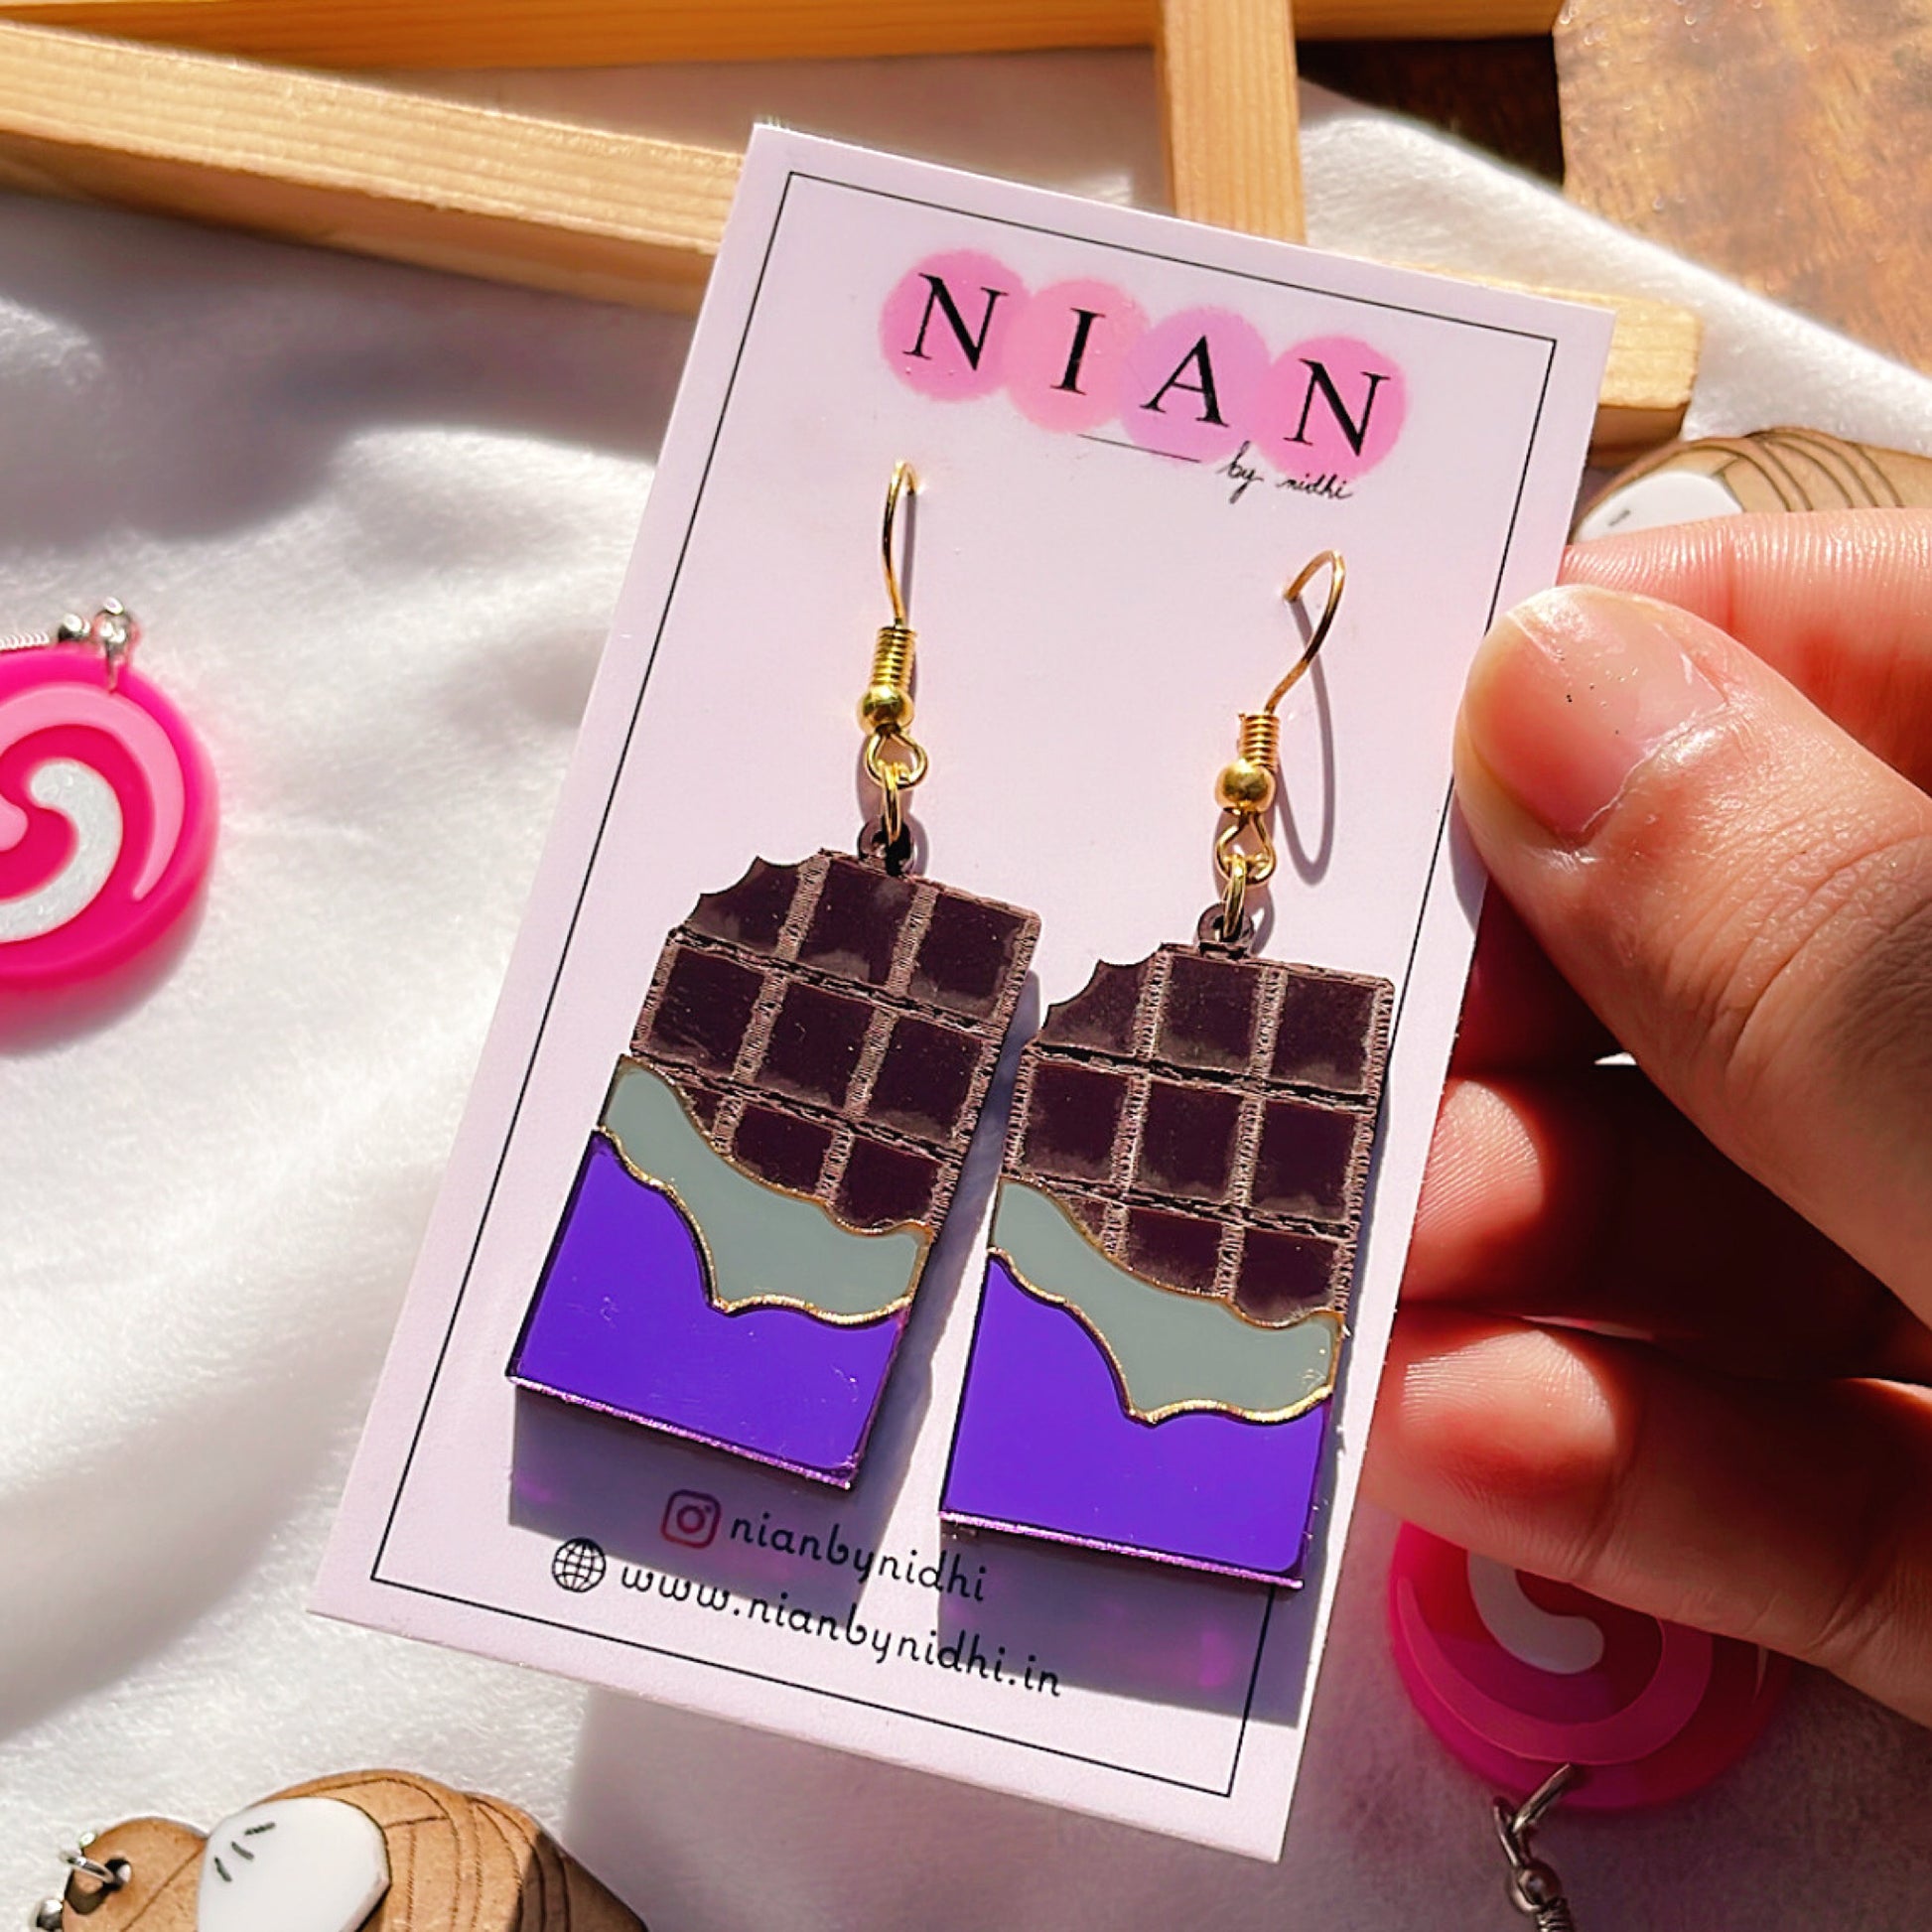 Choco Candy Earrings - Purple and Brown - Nian by Nidhi - placed in a white background, held in a woman's hand